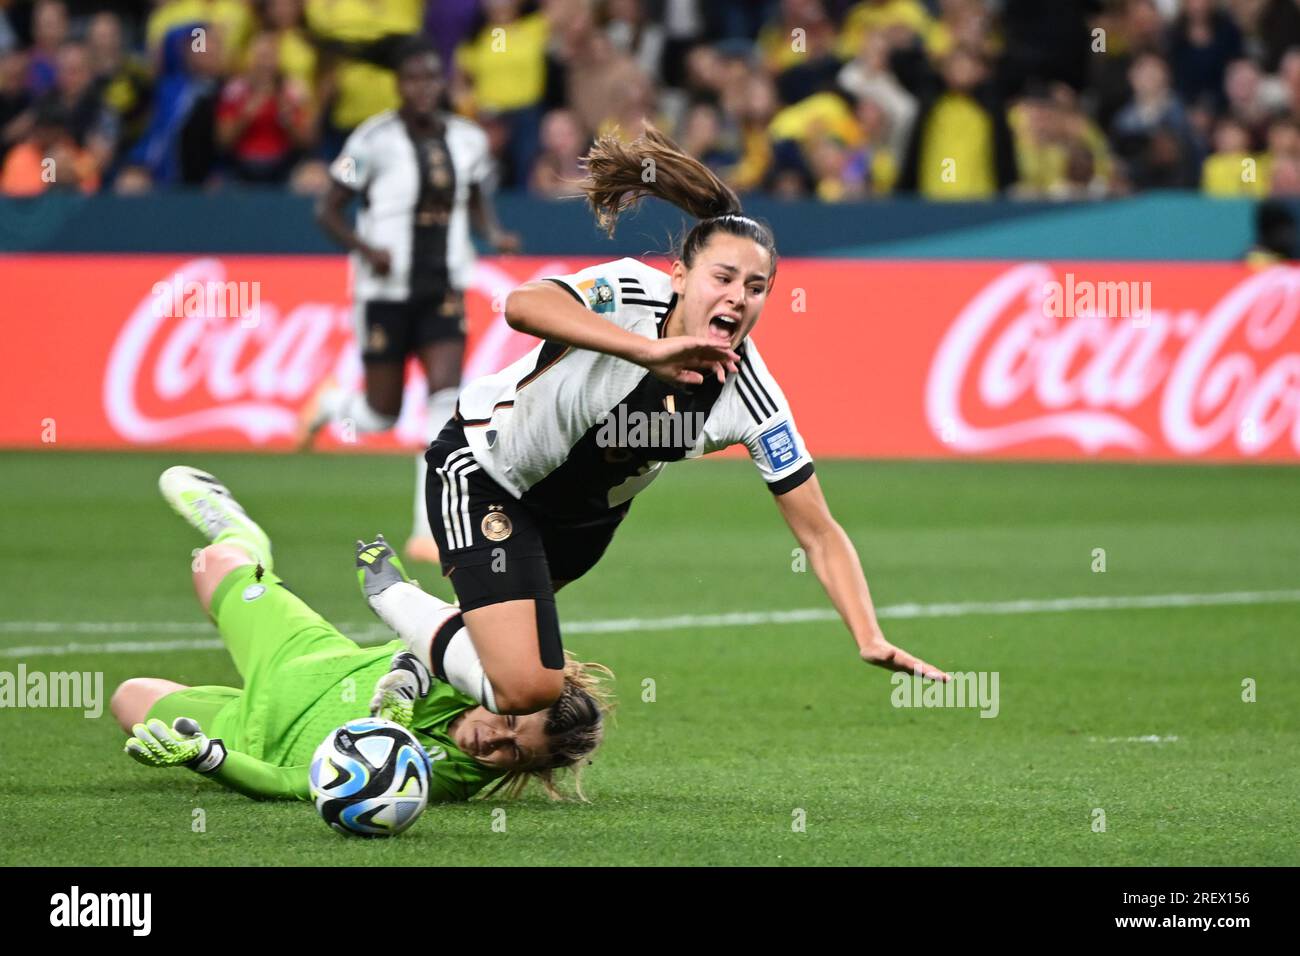 Sydney, Australia. 30th July, 2023. Soccer, Women: World Cup, Germany - Colombia, Preliminary Round, Group H, Matchday 2 at Sydney Football Stadium, Germany's Lena Oberdorf is fouled by Colombia goalkeeper Catalina Pérez. Credit: Sebastian Christoph Gollnow/dpa/Alamy Live News Stock Photo